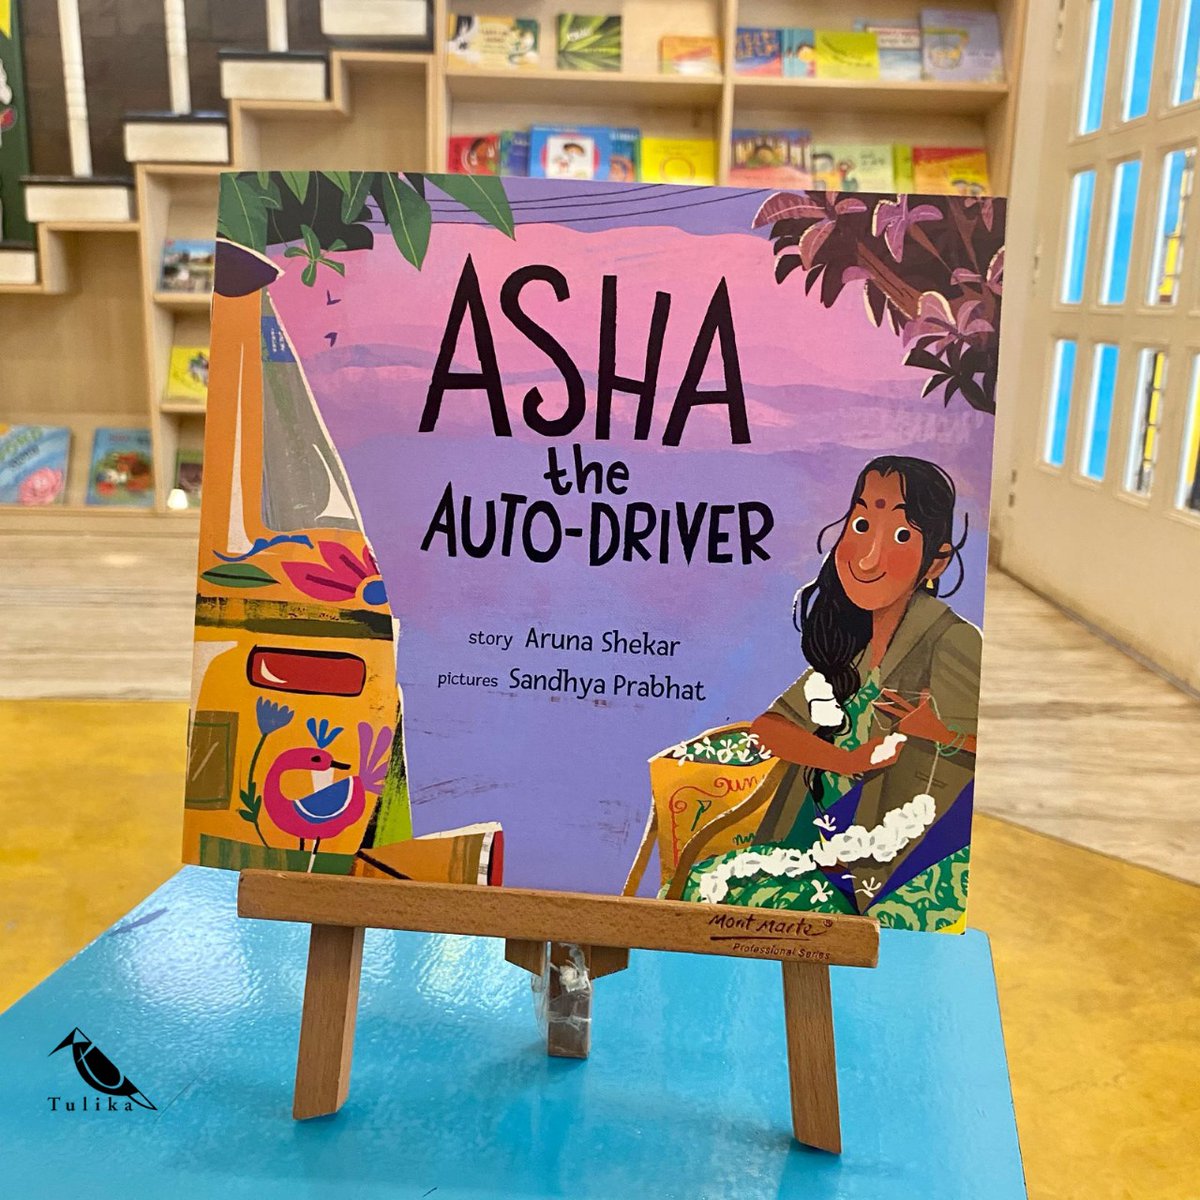 📚📚HOT OFF THE PRESS! 📚📚 Asha the Auto-Driver written by Aruna Shekar and pictures by Sandhya Prabhat is available in English, Hindi, Tamil, Telugu, Kannada, Malayalam, Marathi, Gujarati and Bengali. Head over to tulikabooks.com to grab a copy and avail a 20% discount